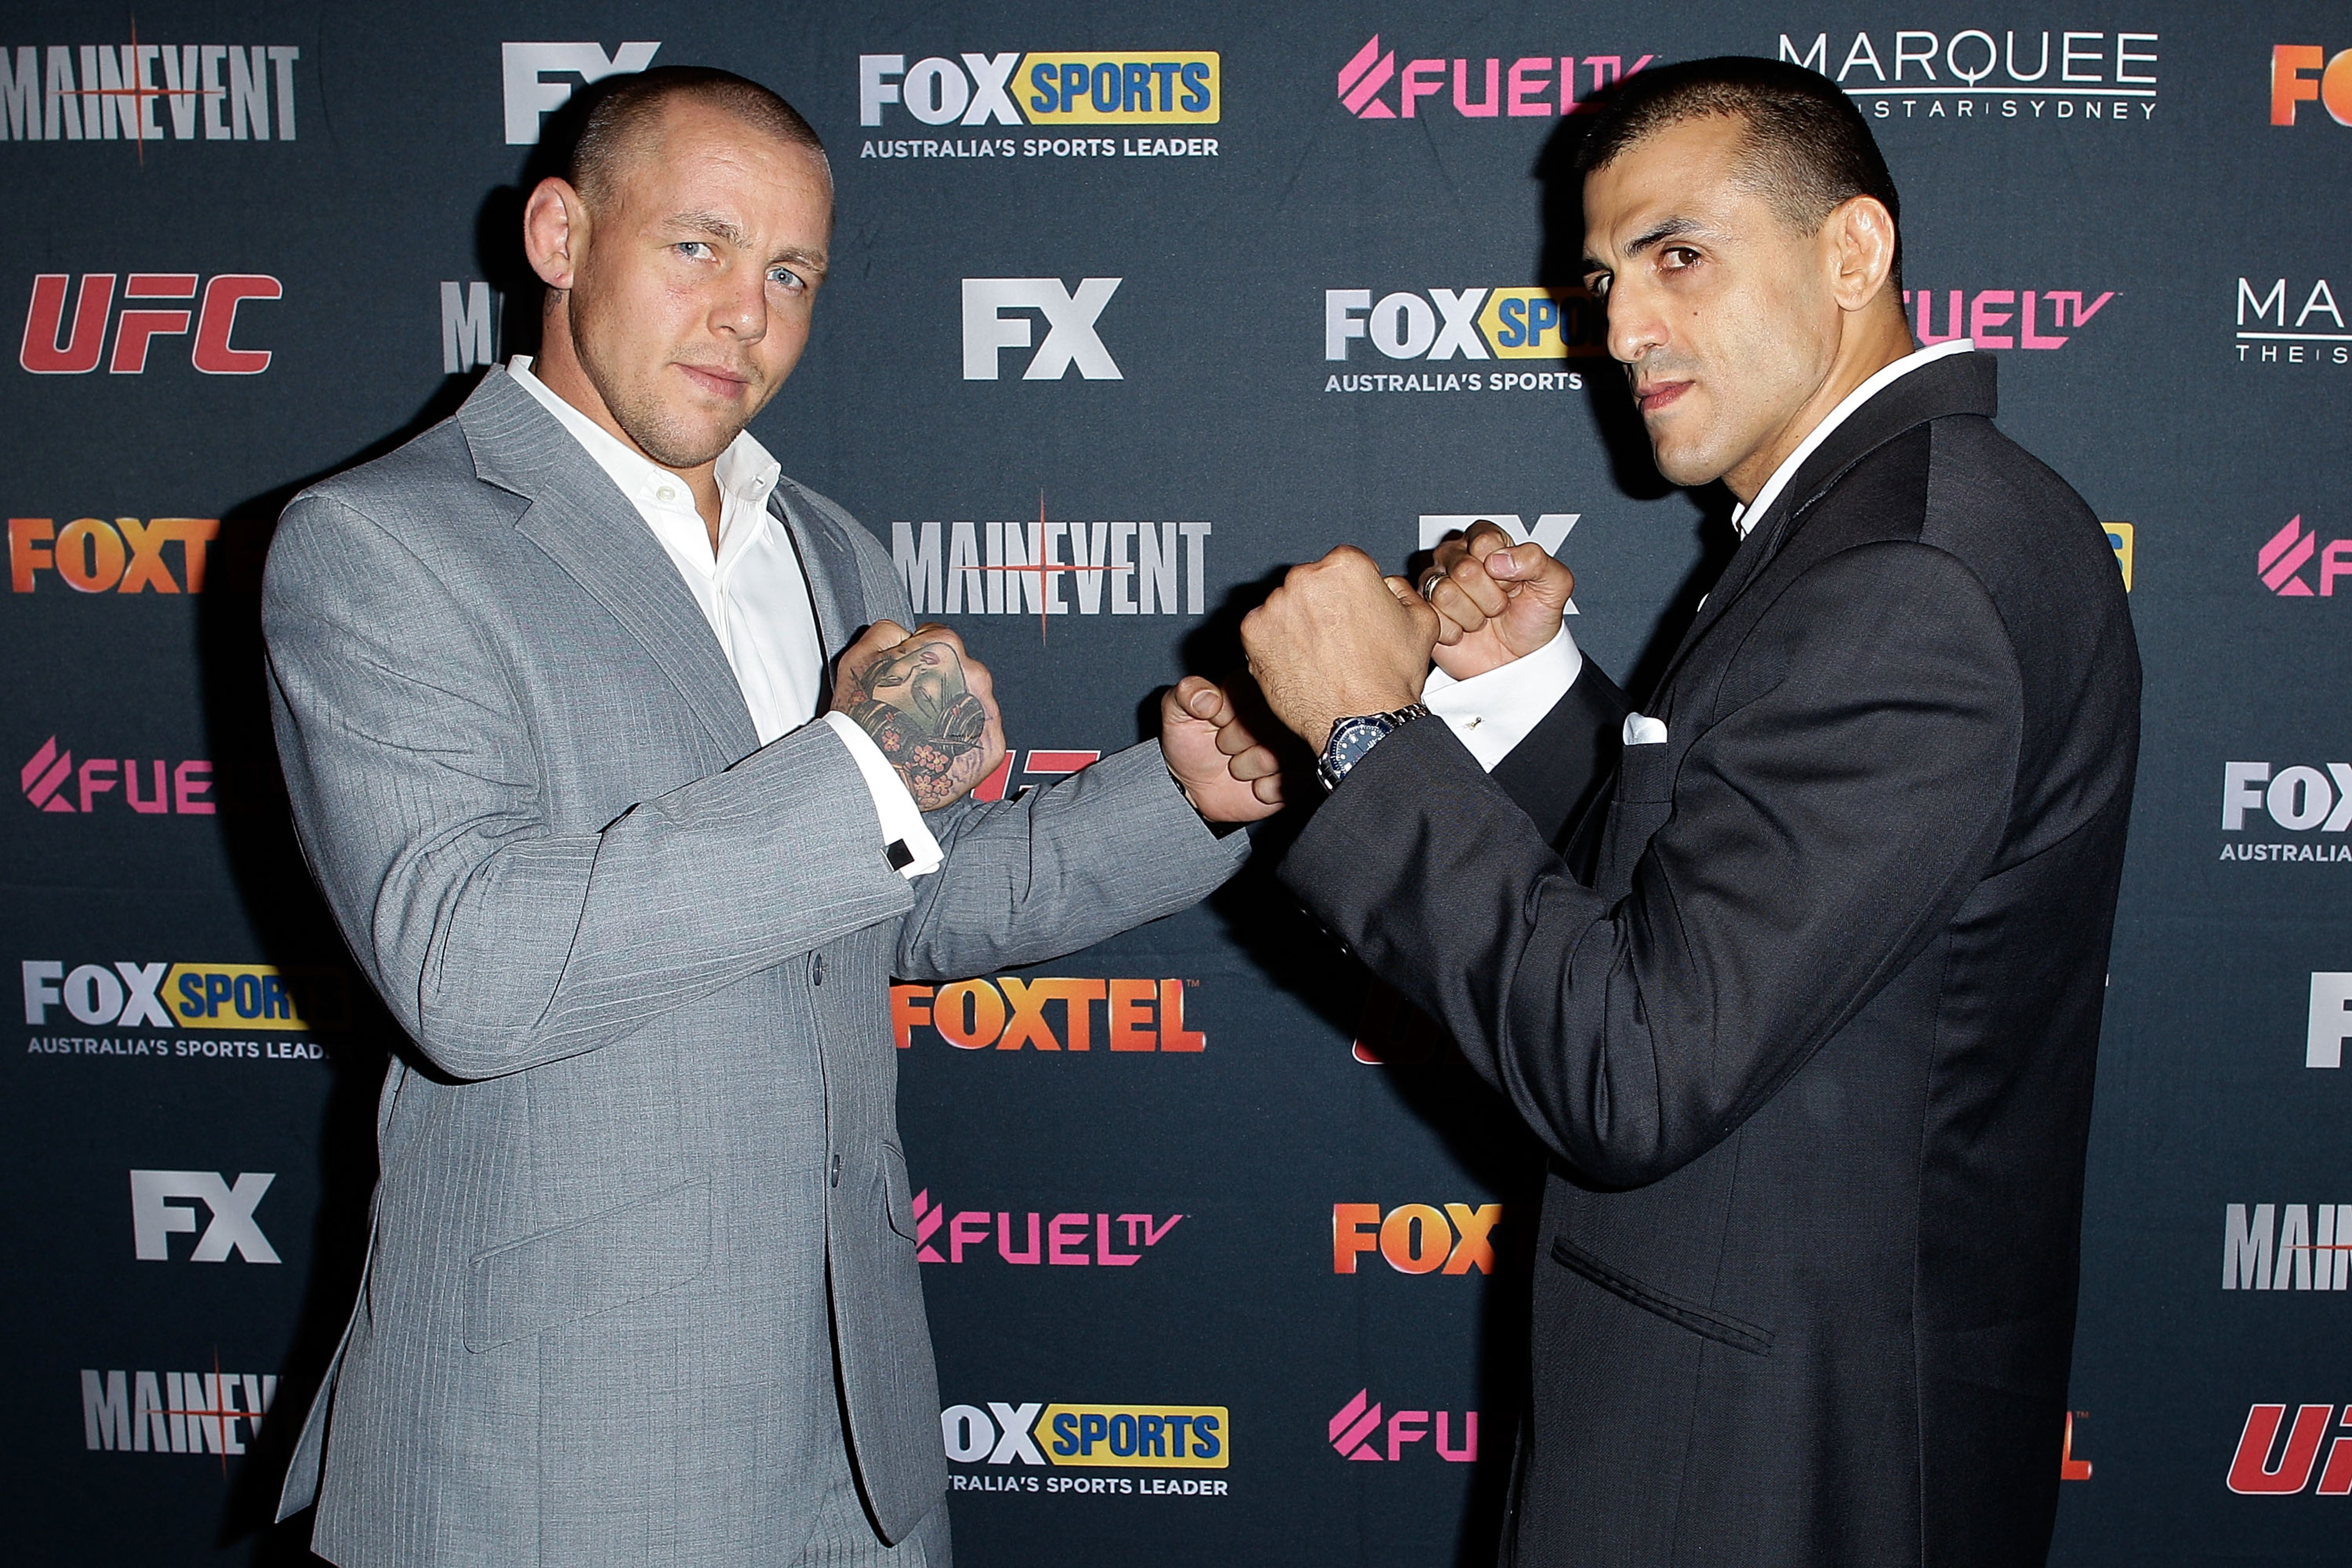 SYDNEY, AUSTRALIA - JULY 17:  (L-R) Ross Pearson and George Sotiropoulos arrive at the TUF Australia Launch Party on July 17, 2012 in Sydney, Australia.  (Photo by Brendon Thorne/Getty Images)